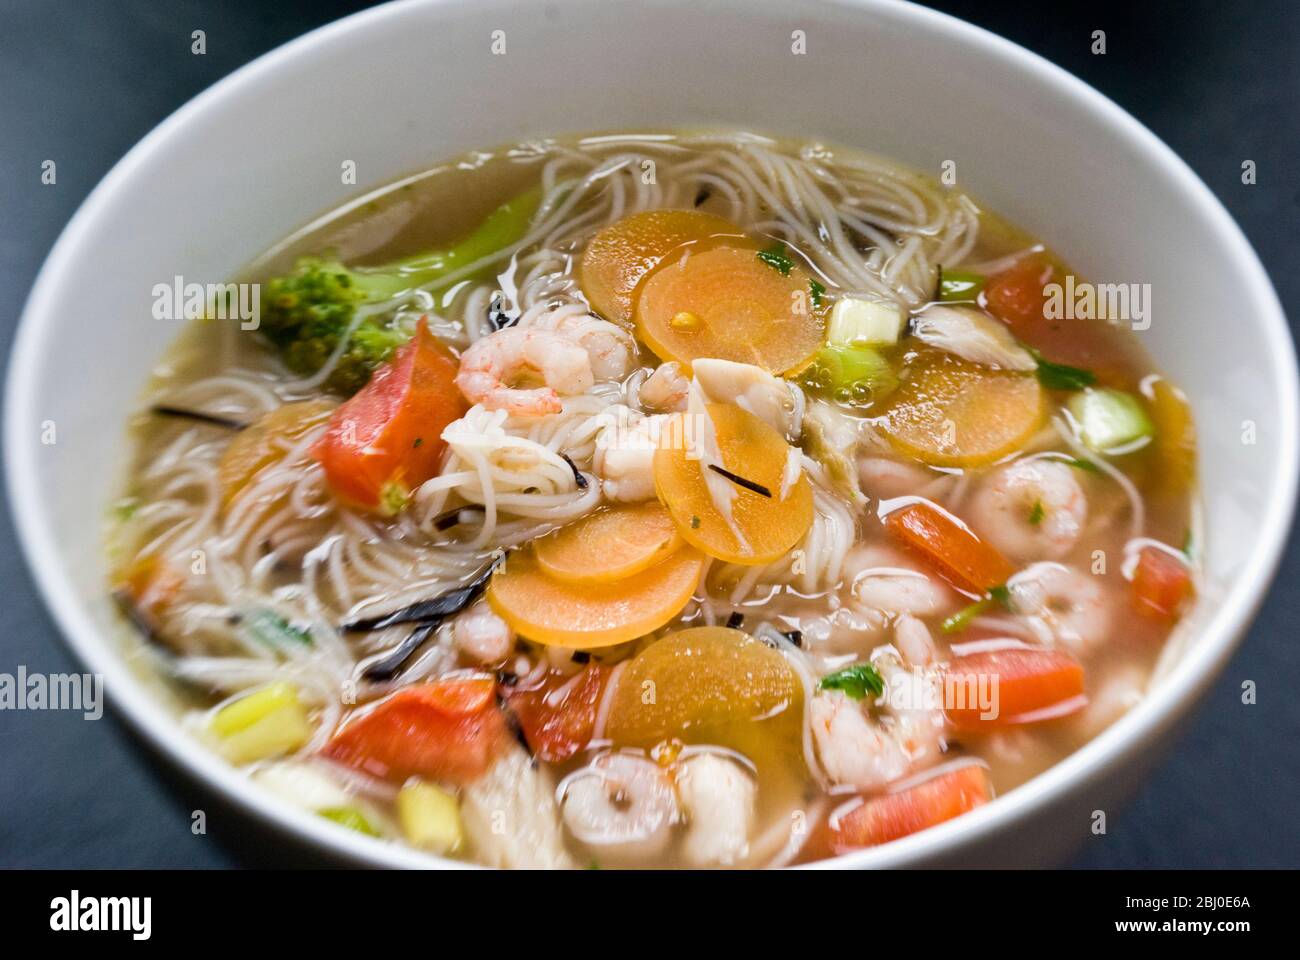 Bowl of asian style soup with rice noodles, prawns, and vegetables - Stock Photo